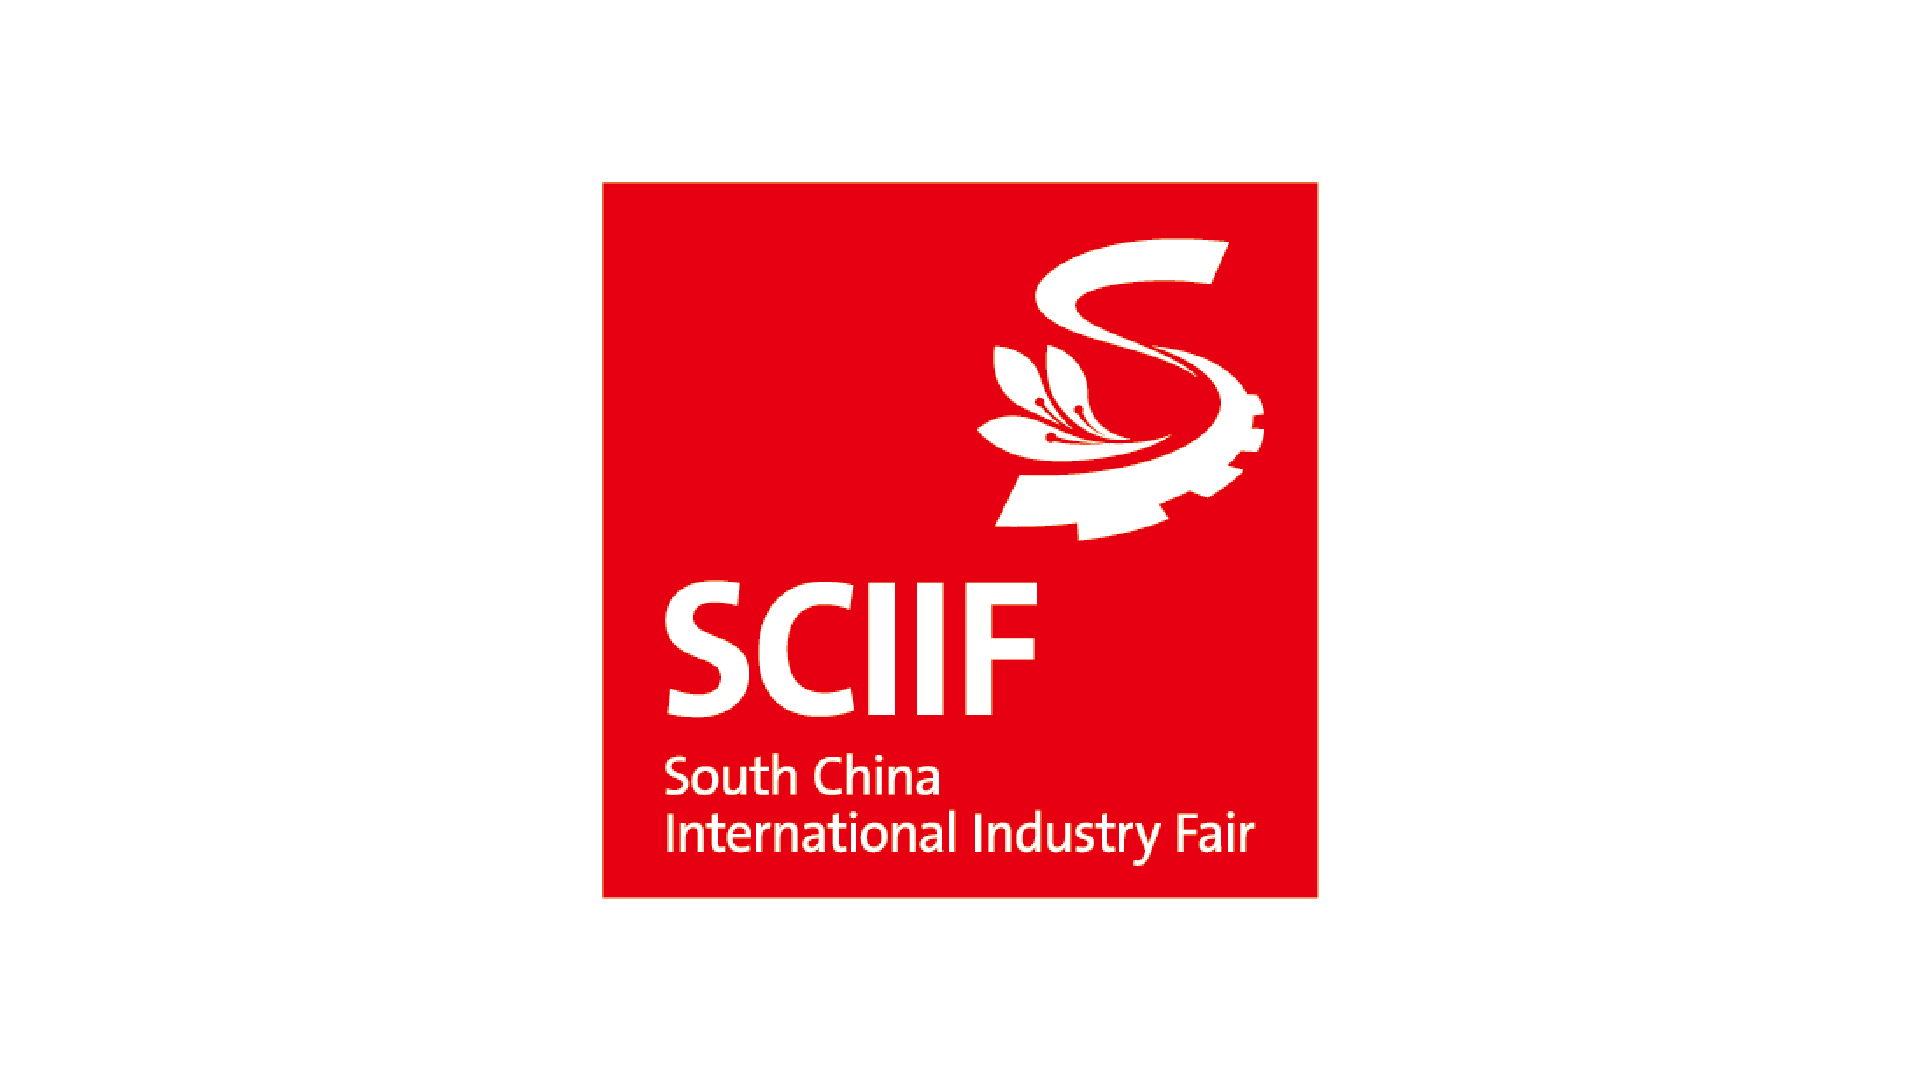 Red and white logo of the South China International Industry Fair (SCIIF)